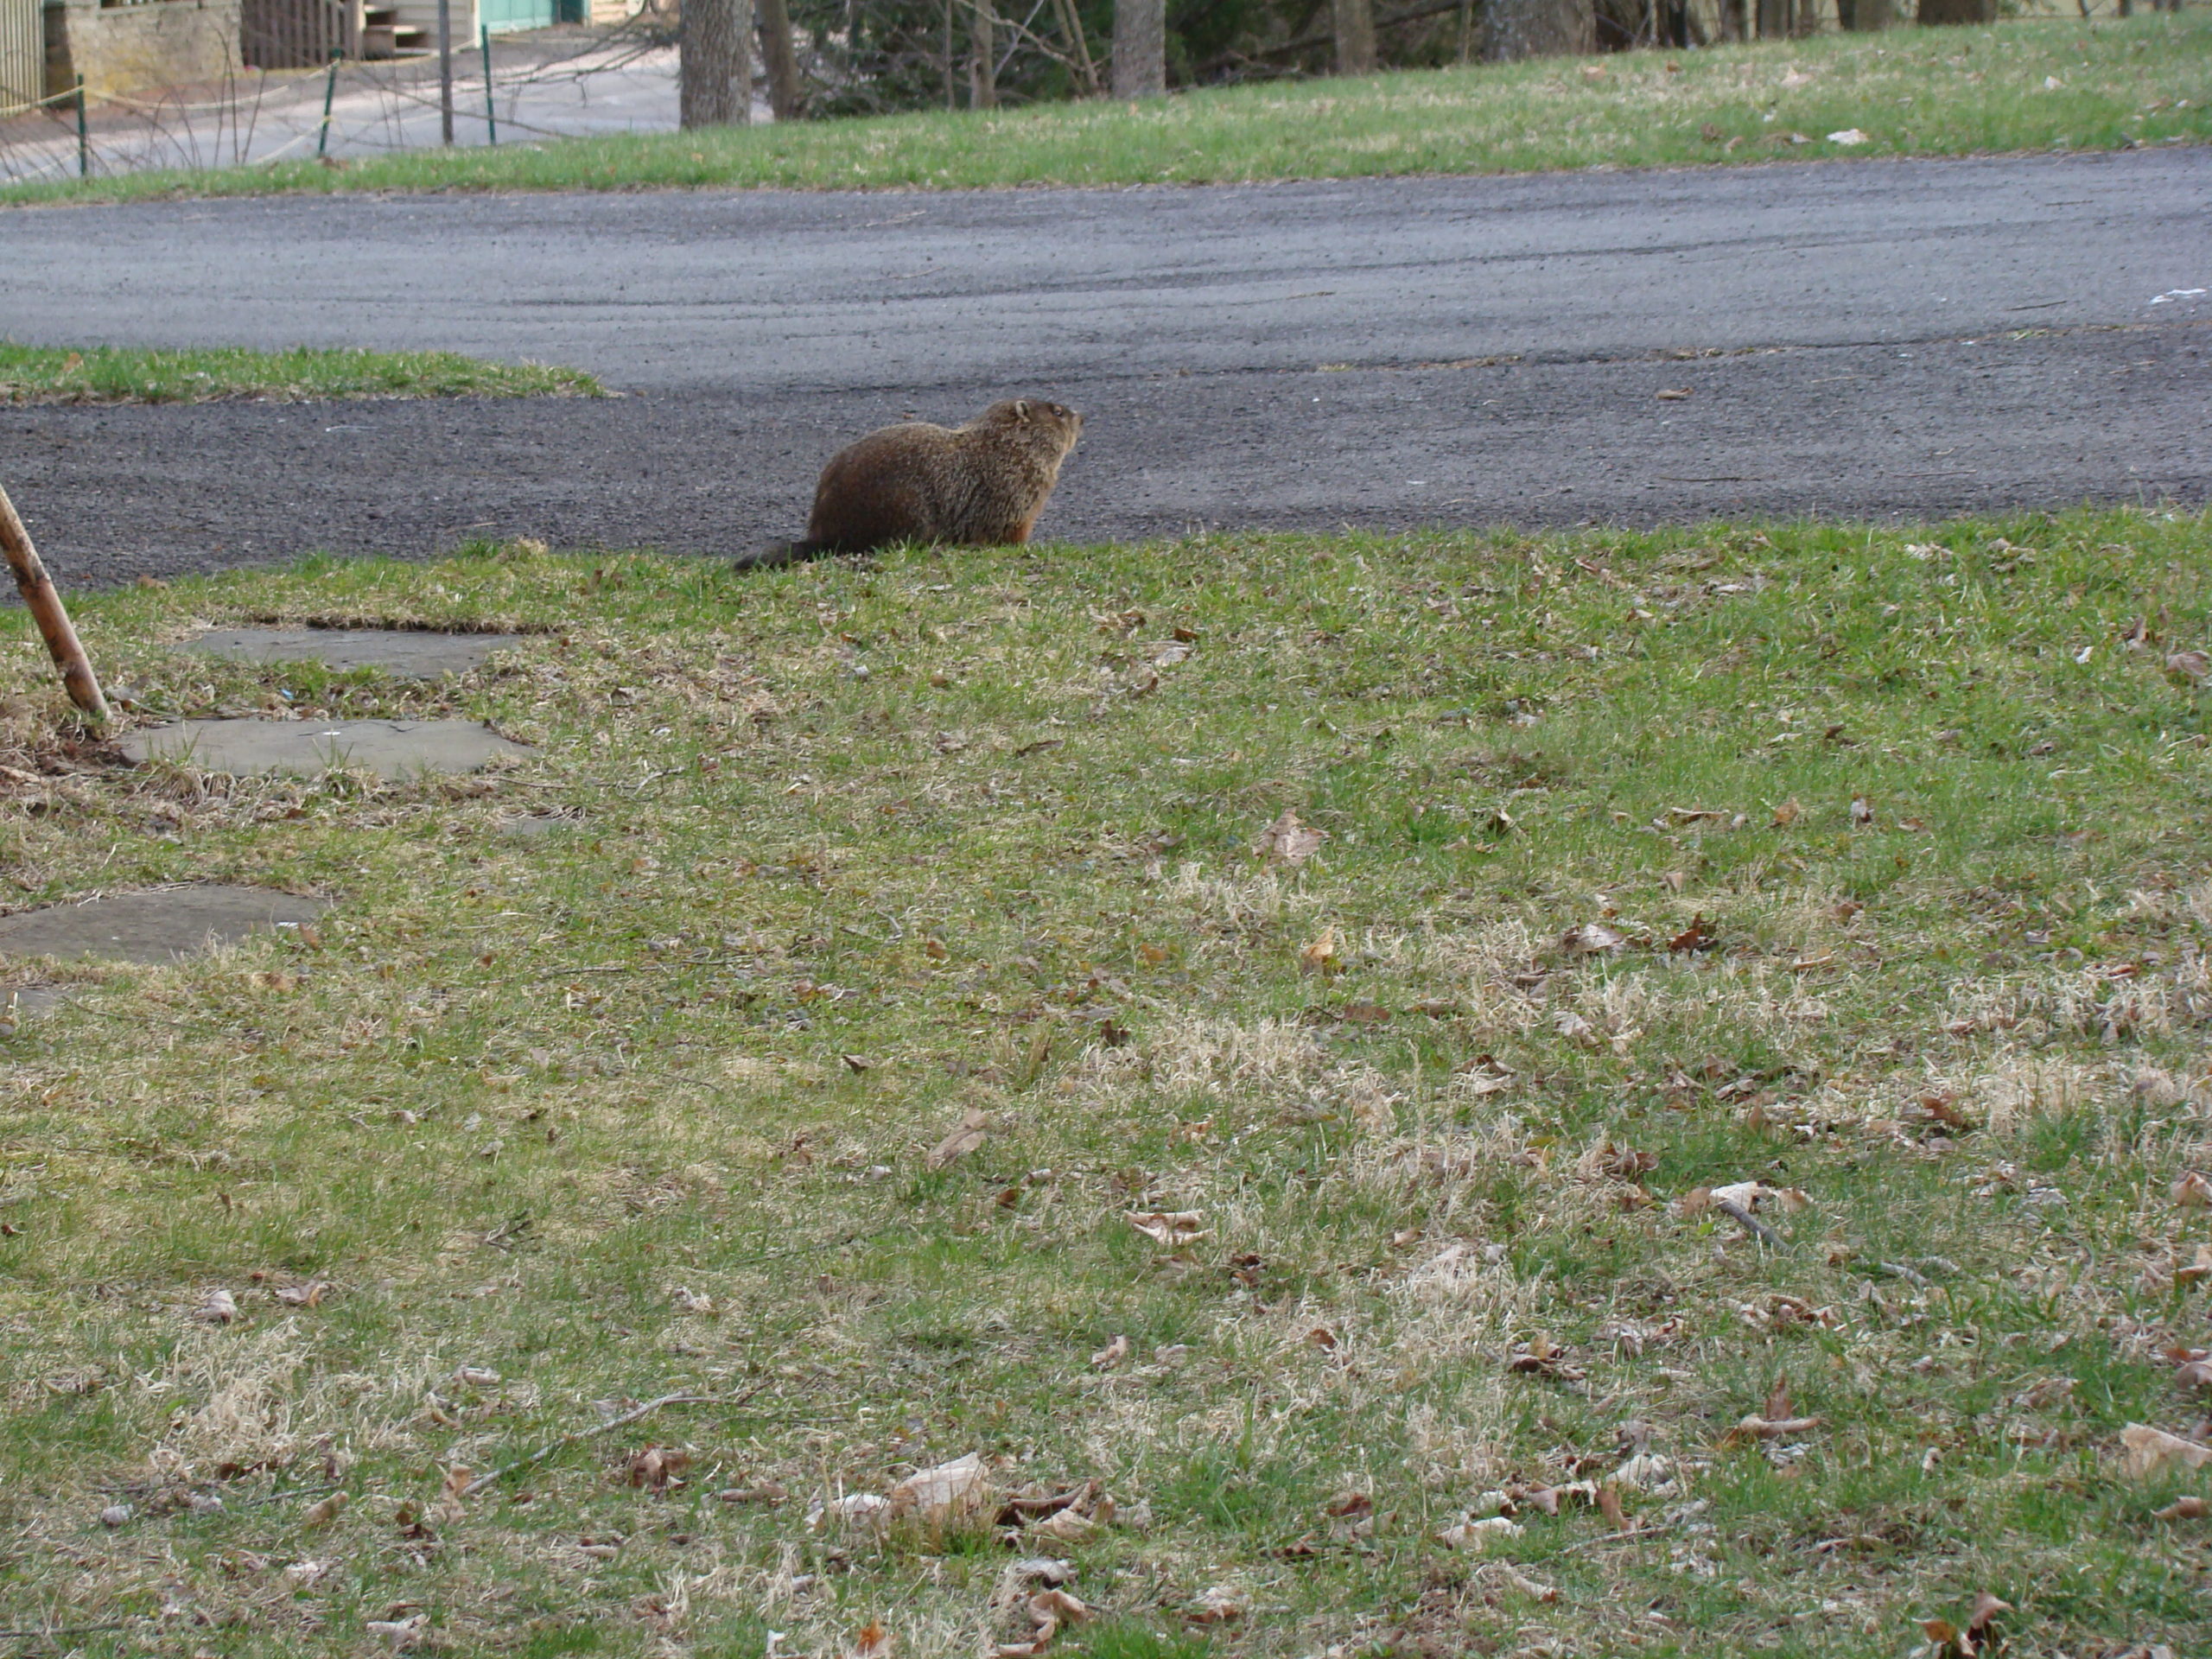 Groundhogs or woodchucks have now been reported in Water Mill.  They really have no natural enemies out here other than automobiles and angry gardeners.